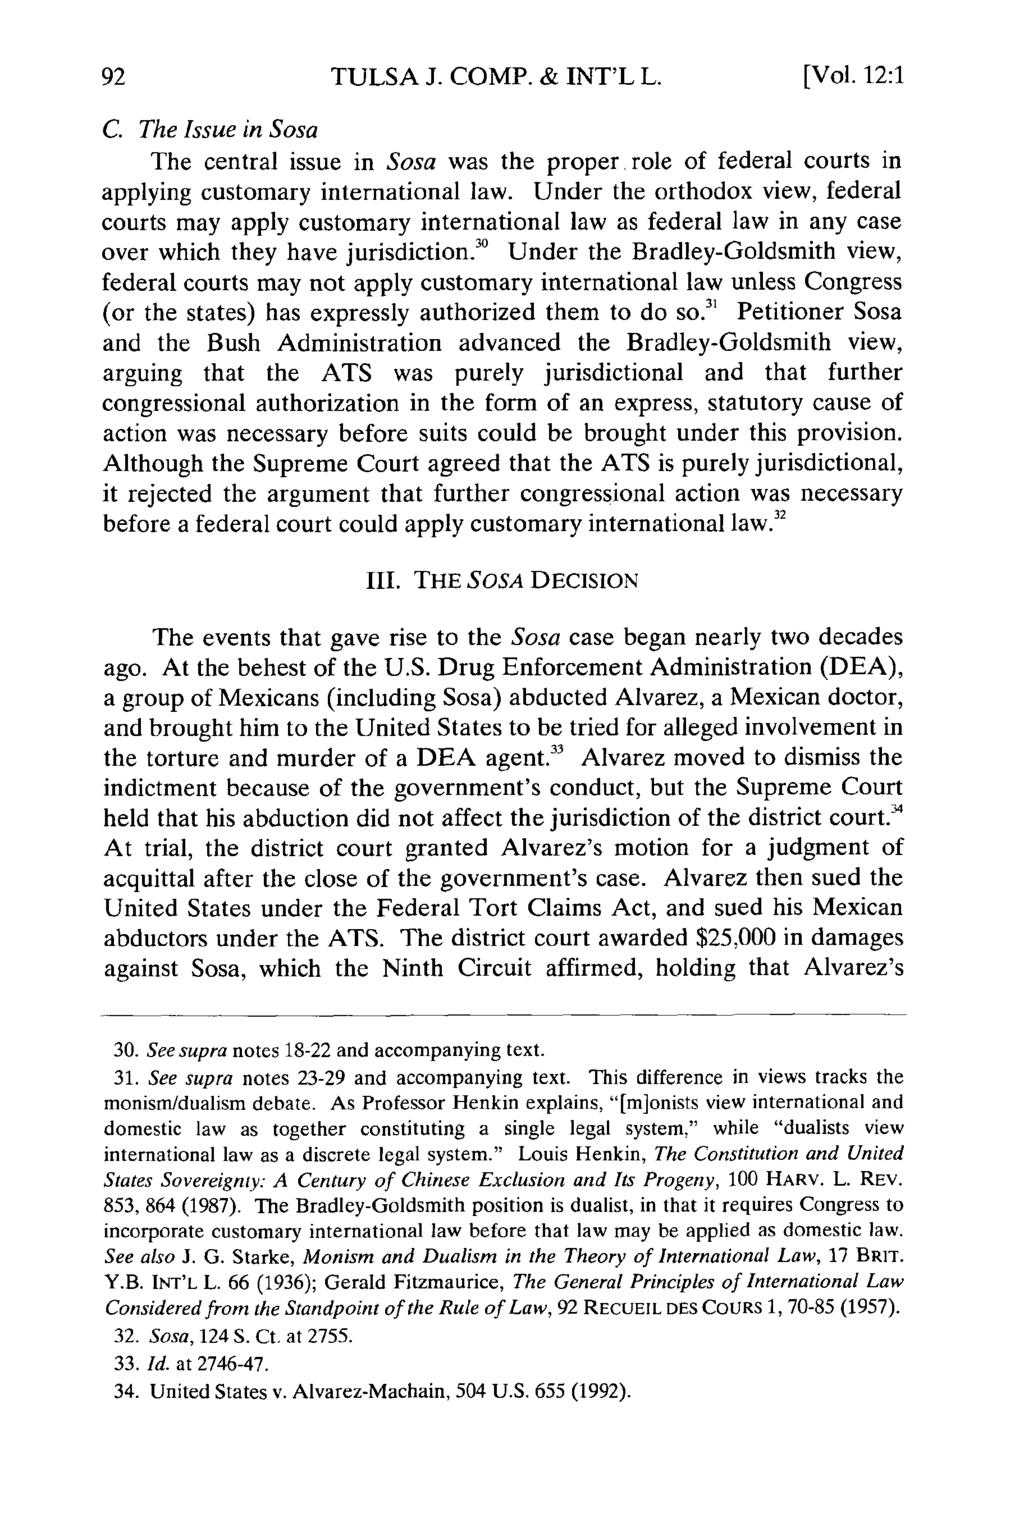 TULSA J. COMP. & INT'L L. [Vol. 12:1 C. The Issue in Sosa The central issue in Sosa was the proper role of federal courts in applying customary international law.